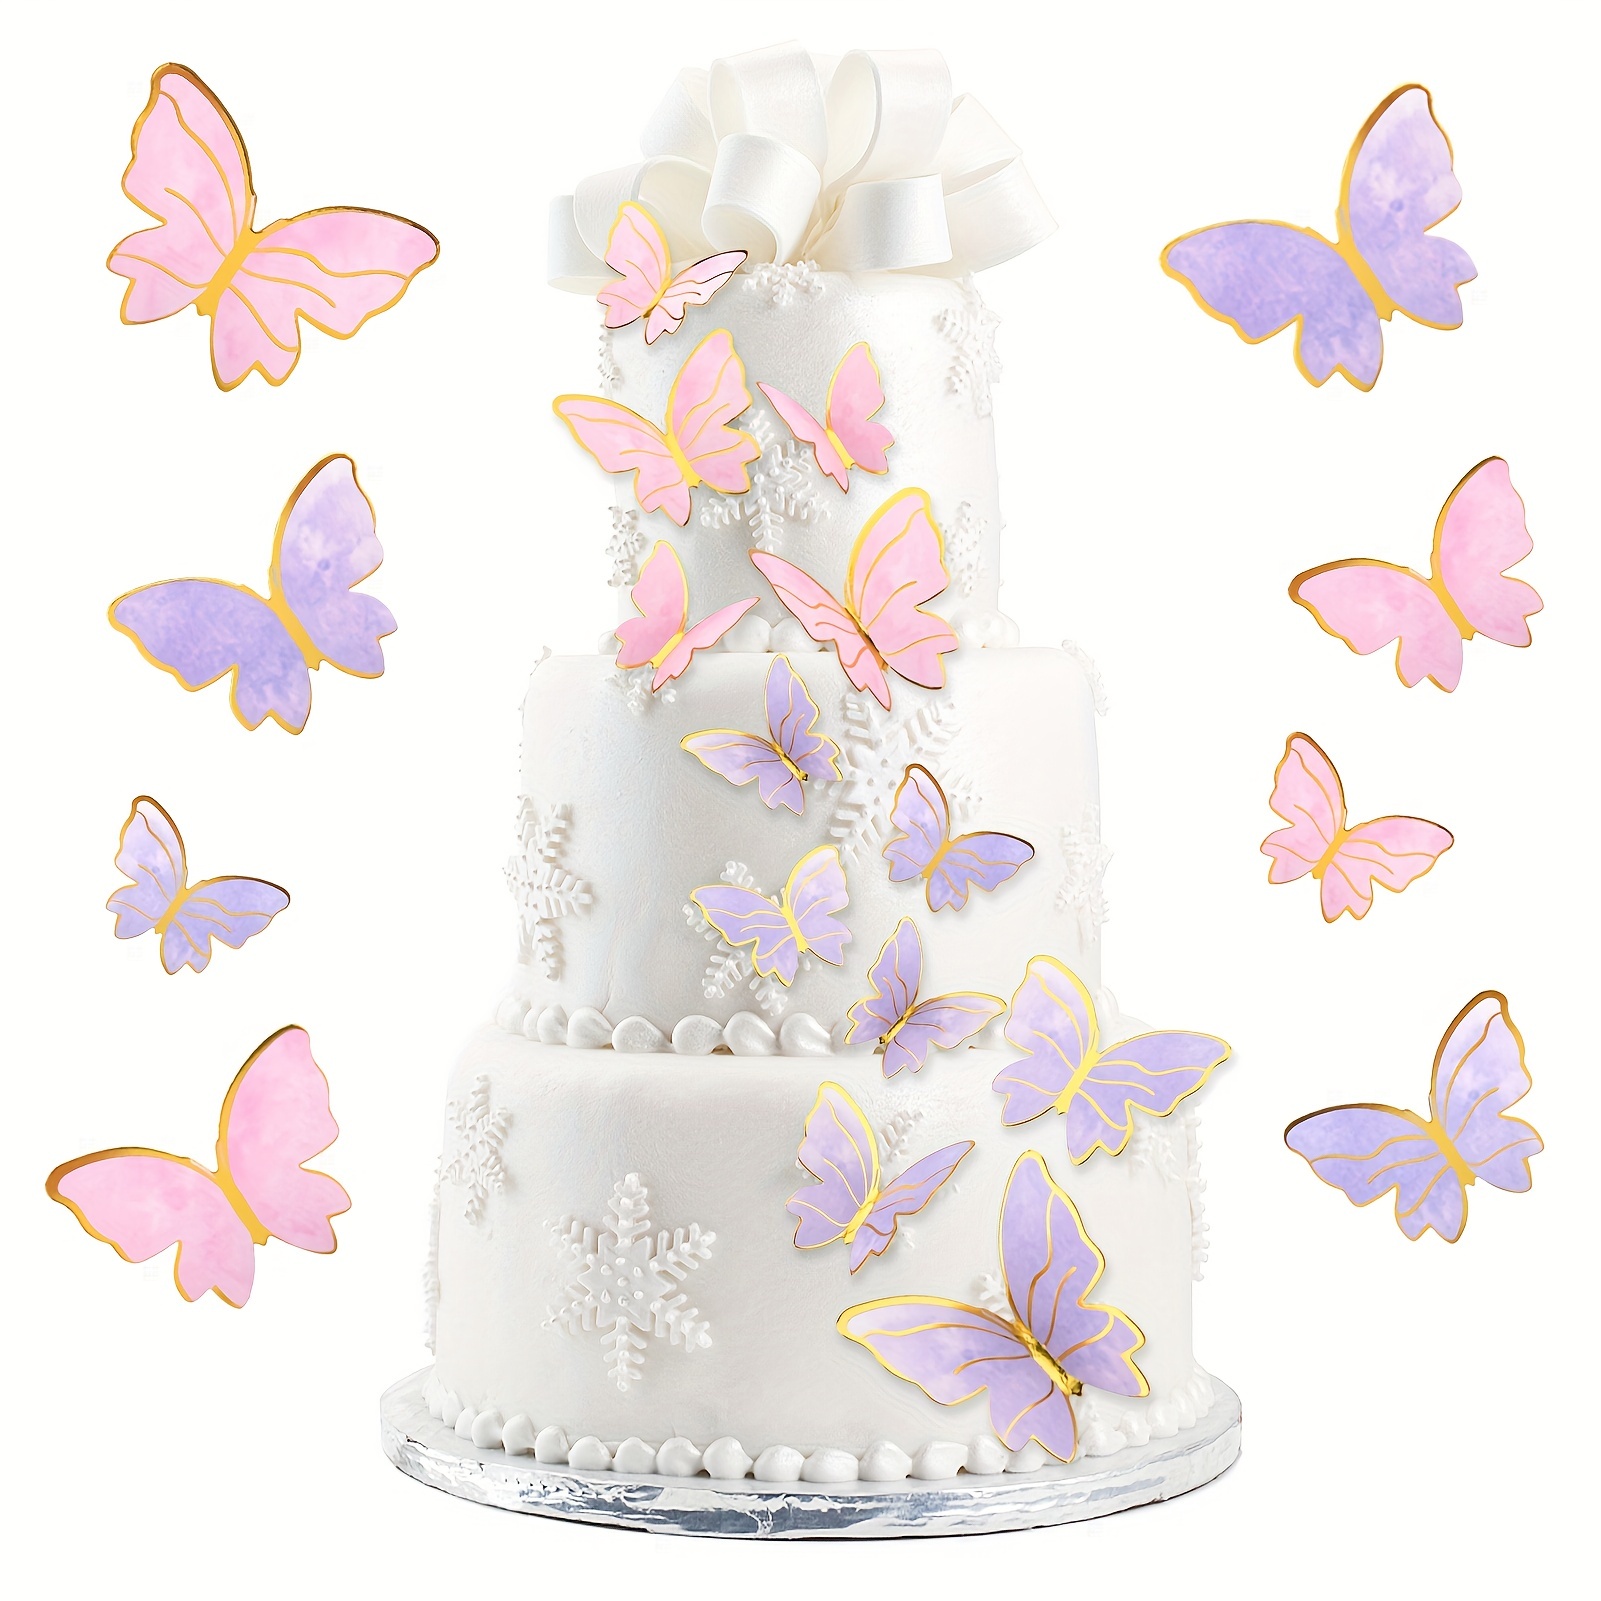  Happy Birthday Cake Topper, 13PCS Butterfly Cake Decorations  with Butterflies Cake Toppers Pink Purple Cake Topper Butterfly Cupcake  Topper for Girls Women Birthday Baby Shower Party : Toys & Games